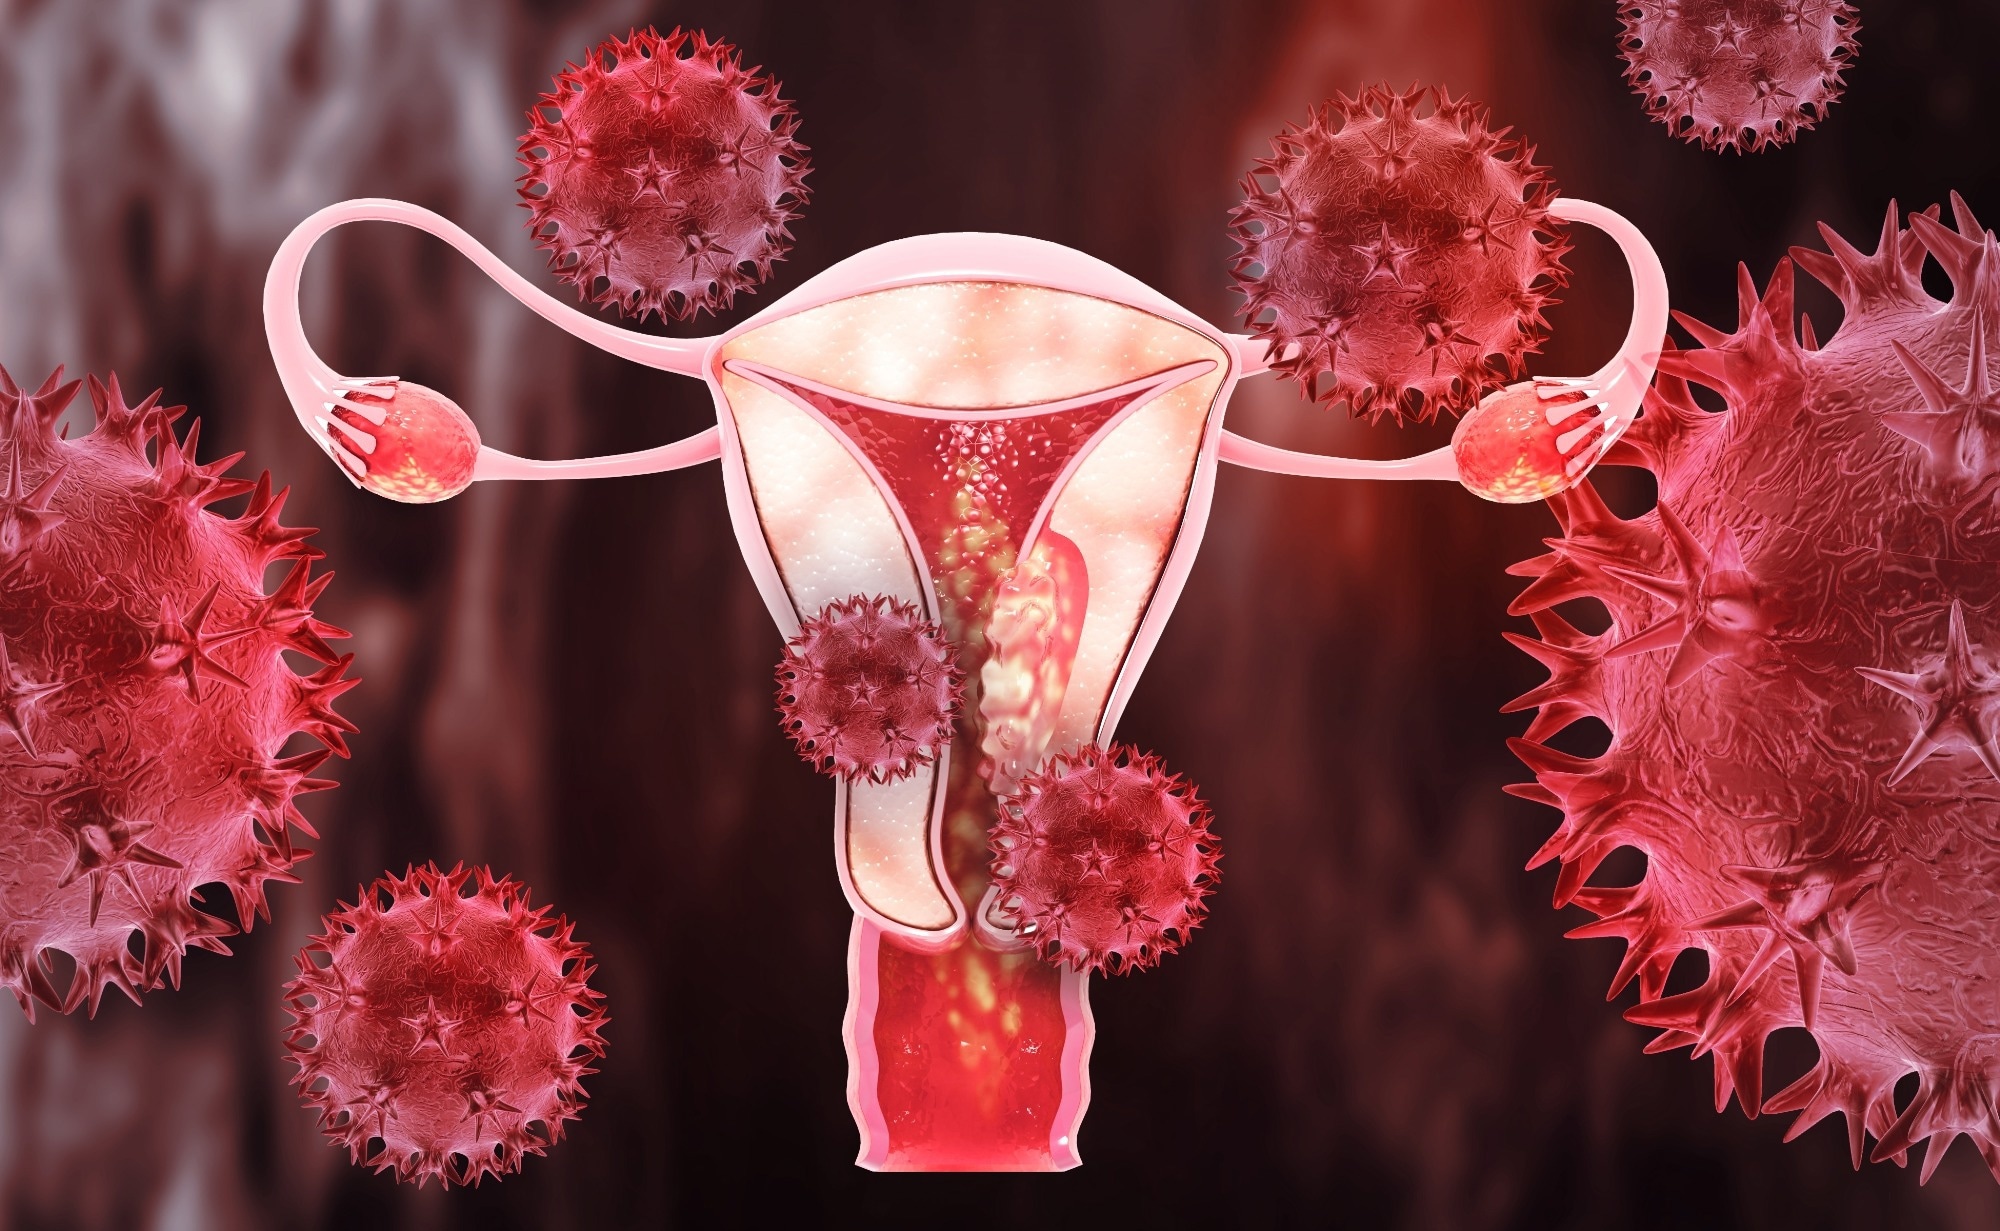 New blood test for endometriosis 'detects up to 90% of cases